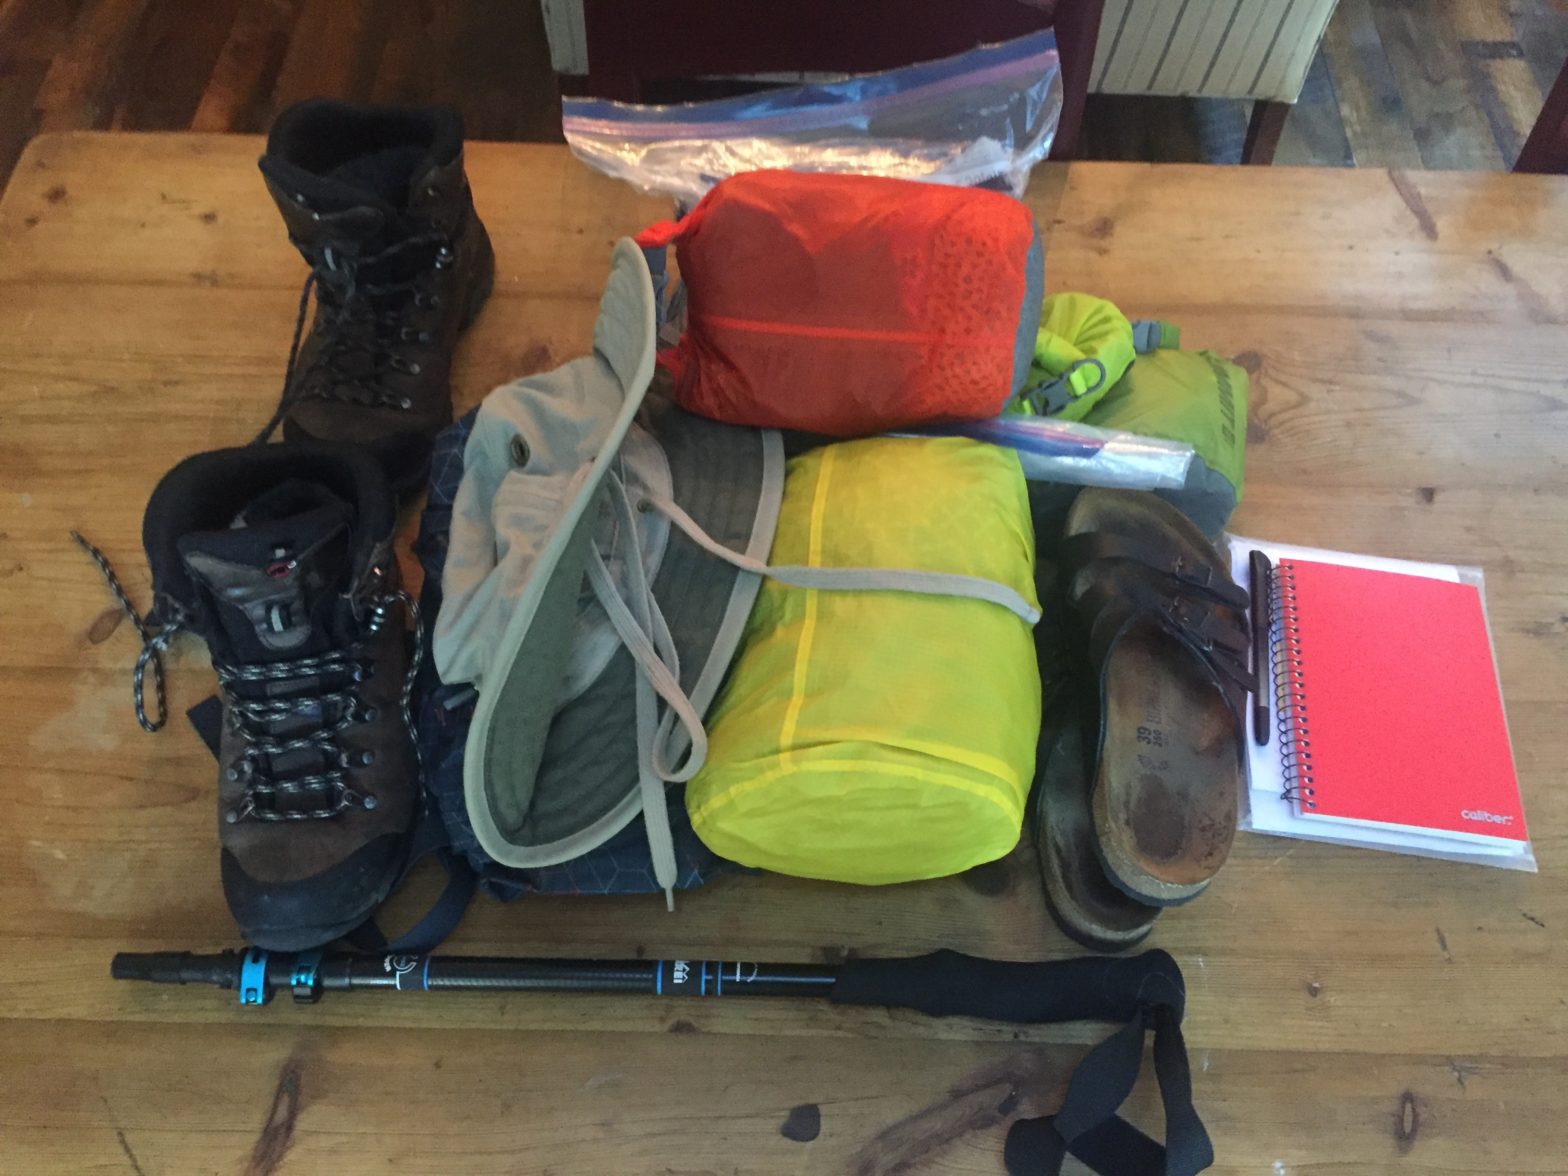 Packing, unpacking and readying myself for the Camino.